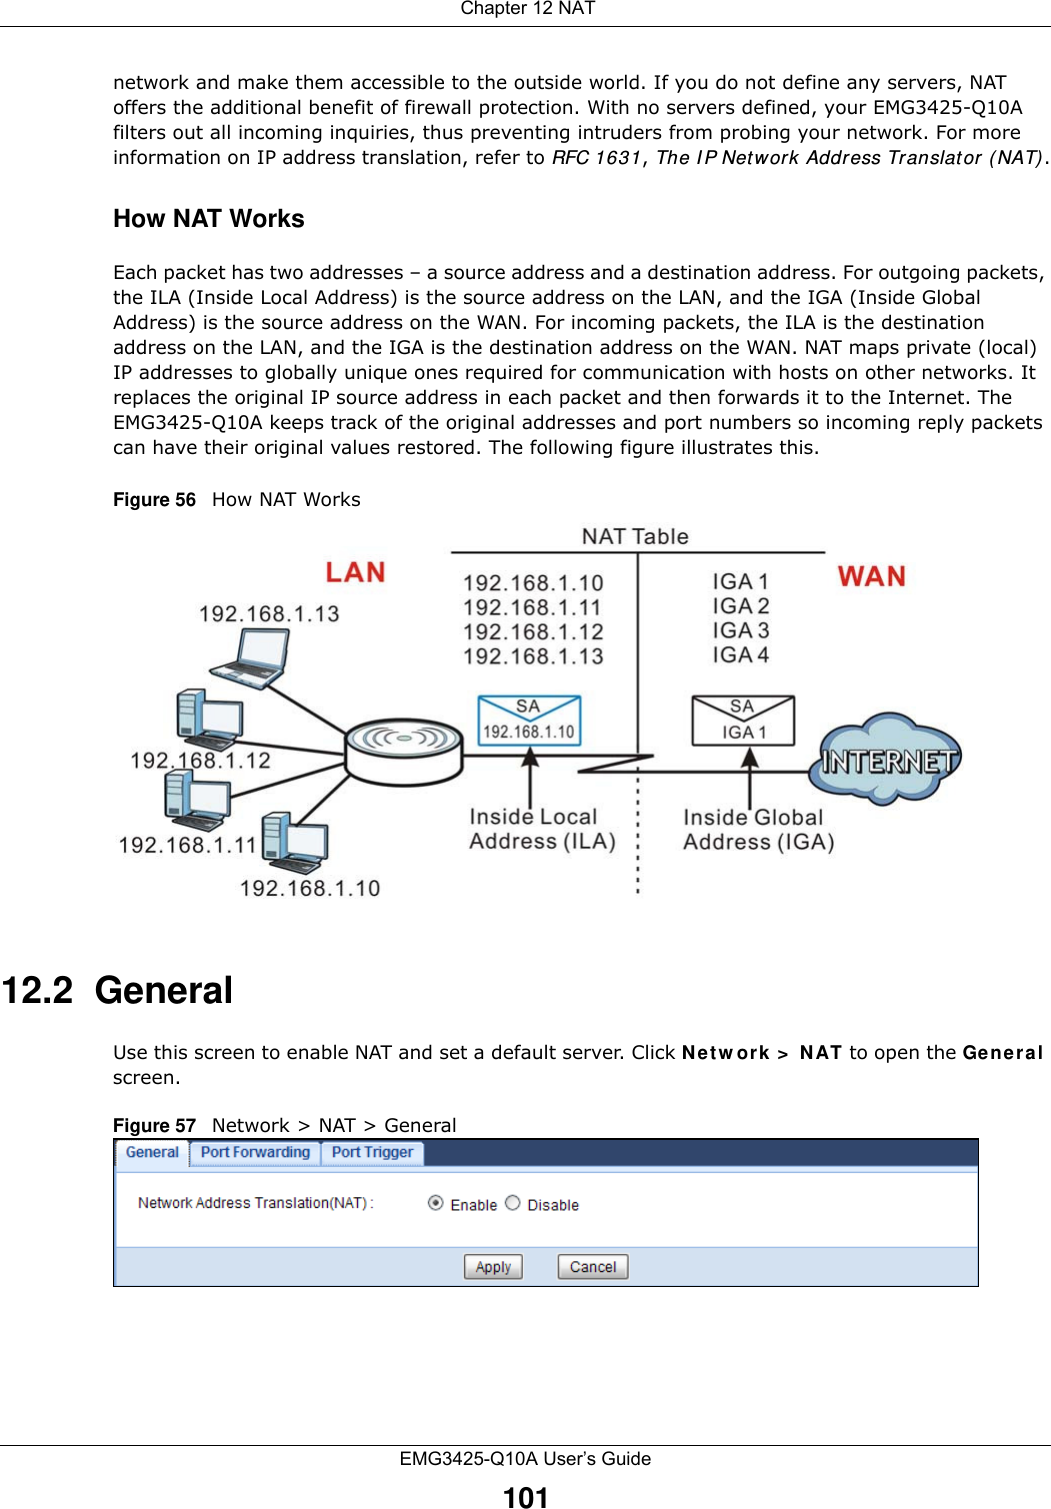  Chapter 12 NATEMG3425-Q10A User’s Guide101network and make them accessible to the outside world. If you do not define any servers, NAT offers the additional benefit of firewall protection. With no servers defined, your EMG3425-Q10A filters out all incoming inquiries, thus preventing intruders from probing your network. For more information on IP address translation, refer to RFC 1631, The I P Network Address Translator ( NAT).How NAT WorksEach packet has two addresses – a source address and a destination address. For outgoing packets, the ILA (Inside Local Address) is the source address on the LAN, and the IGA (Inside Global Address) is the source address on the WAN. For incoming packets, the ILA is the destination address on the LAN, and the IGA is the destination address on the WAN. NAT maps private (local) IP addresses to globally unique ones required for communication with hosts on other networks. It replaces the original IP source address in each packet and then forwards it to the Internet. The EMG3425-Q10A keeps track of the original addresses and port numbers so incoming reply packets can have their original values restored. The following figure illustrates this.Figure 56   How NAT Works12.2  GeneralUse this screen to enable NAT and set a default server. Click Ne t w ork &gt;  N AT to open the Gener a l screen.Figure 57   Network &gt; NAT &gt; General 